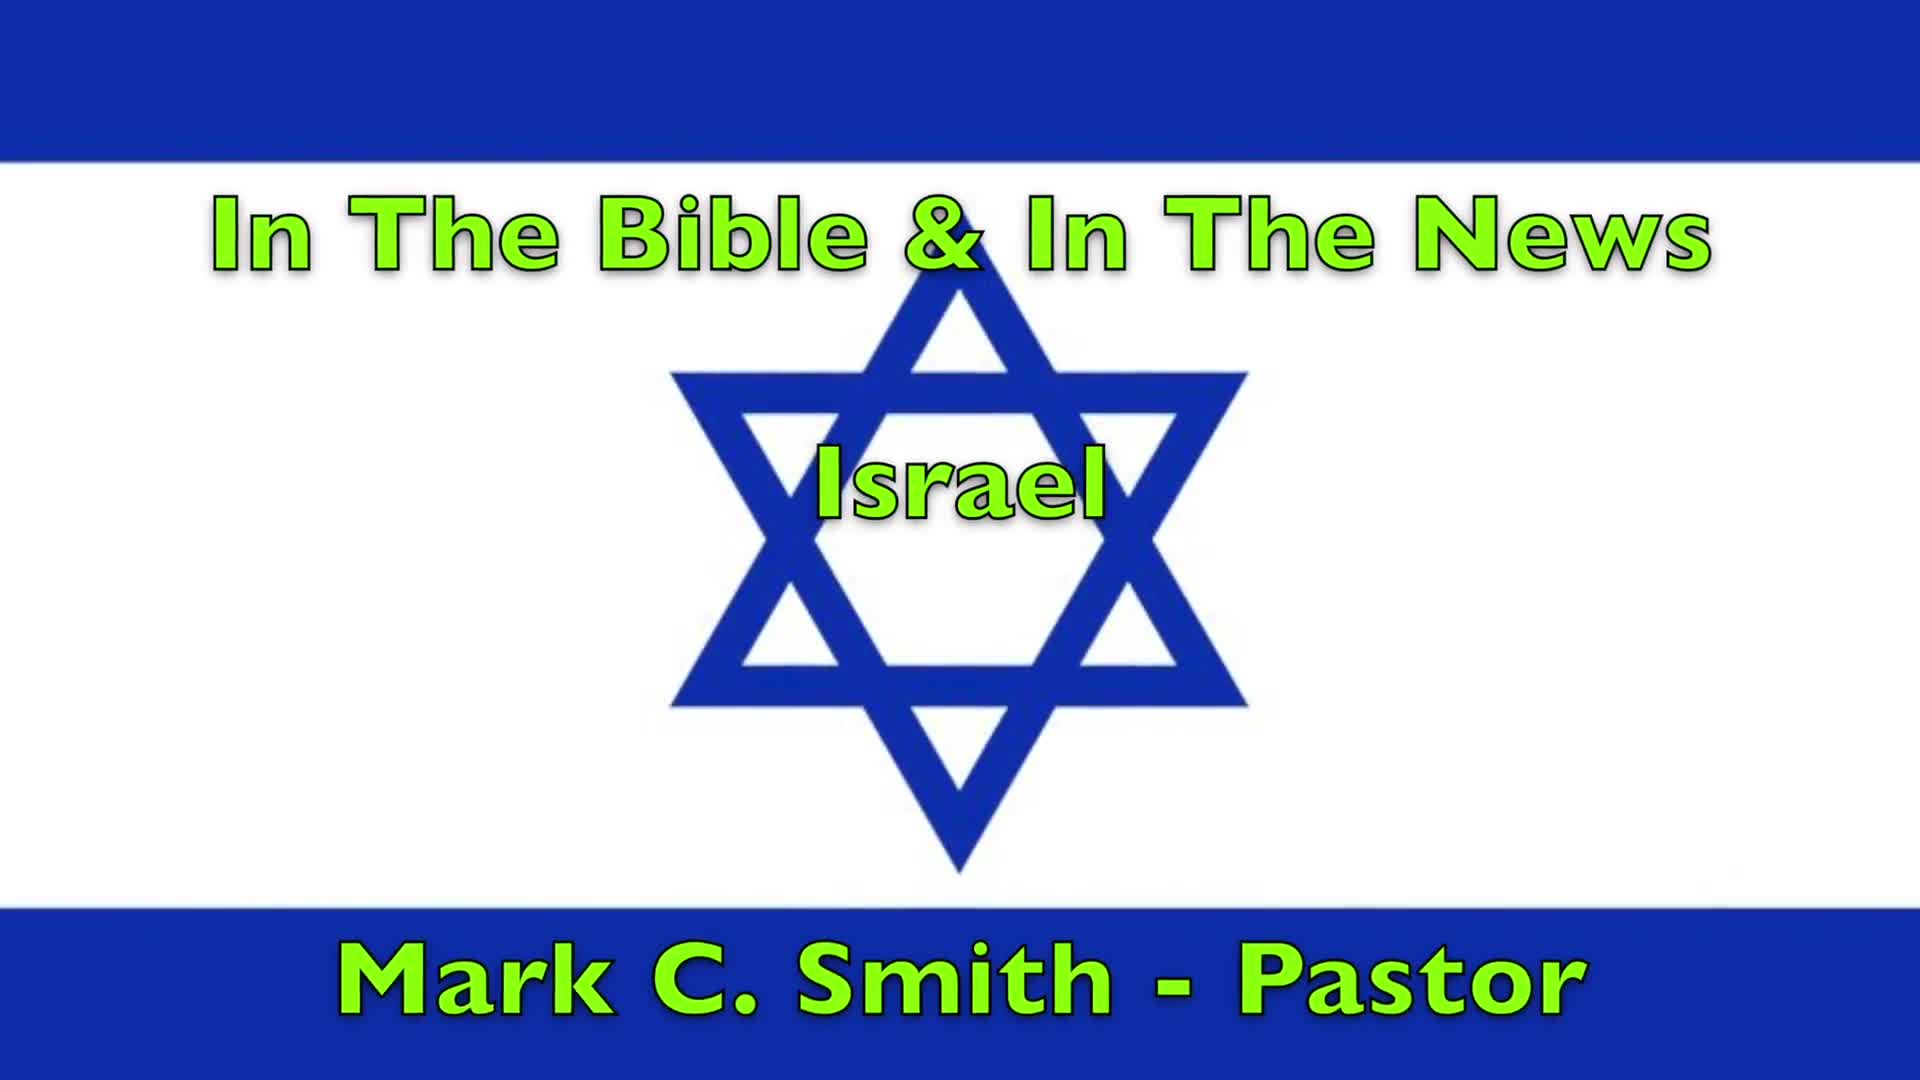 In The News and In The Bible - Israel